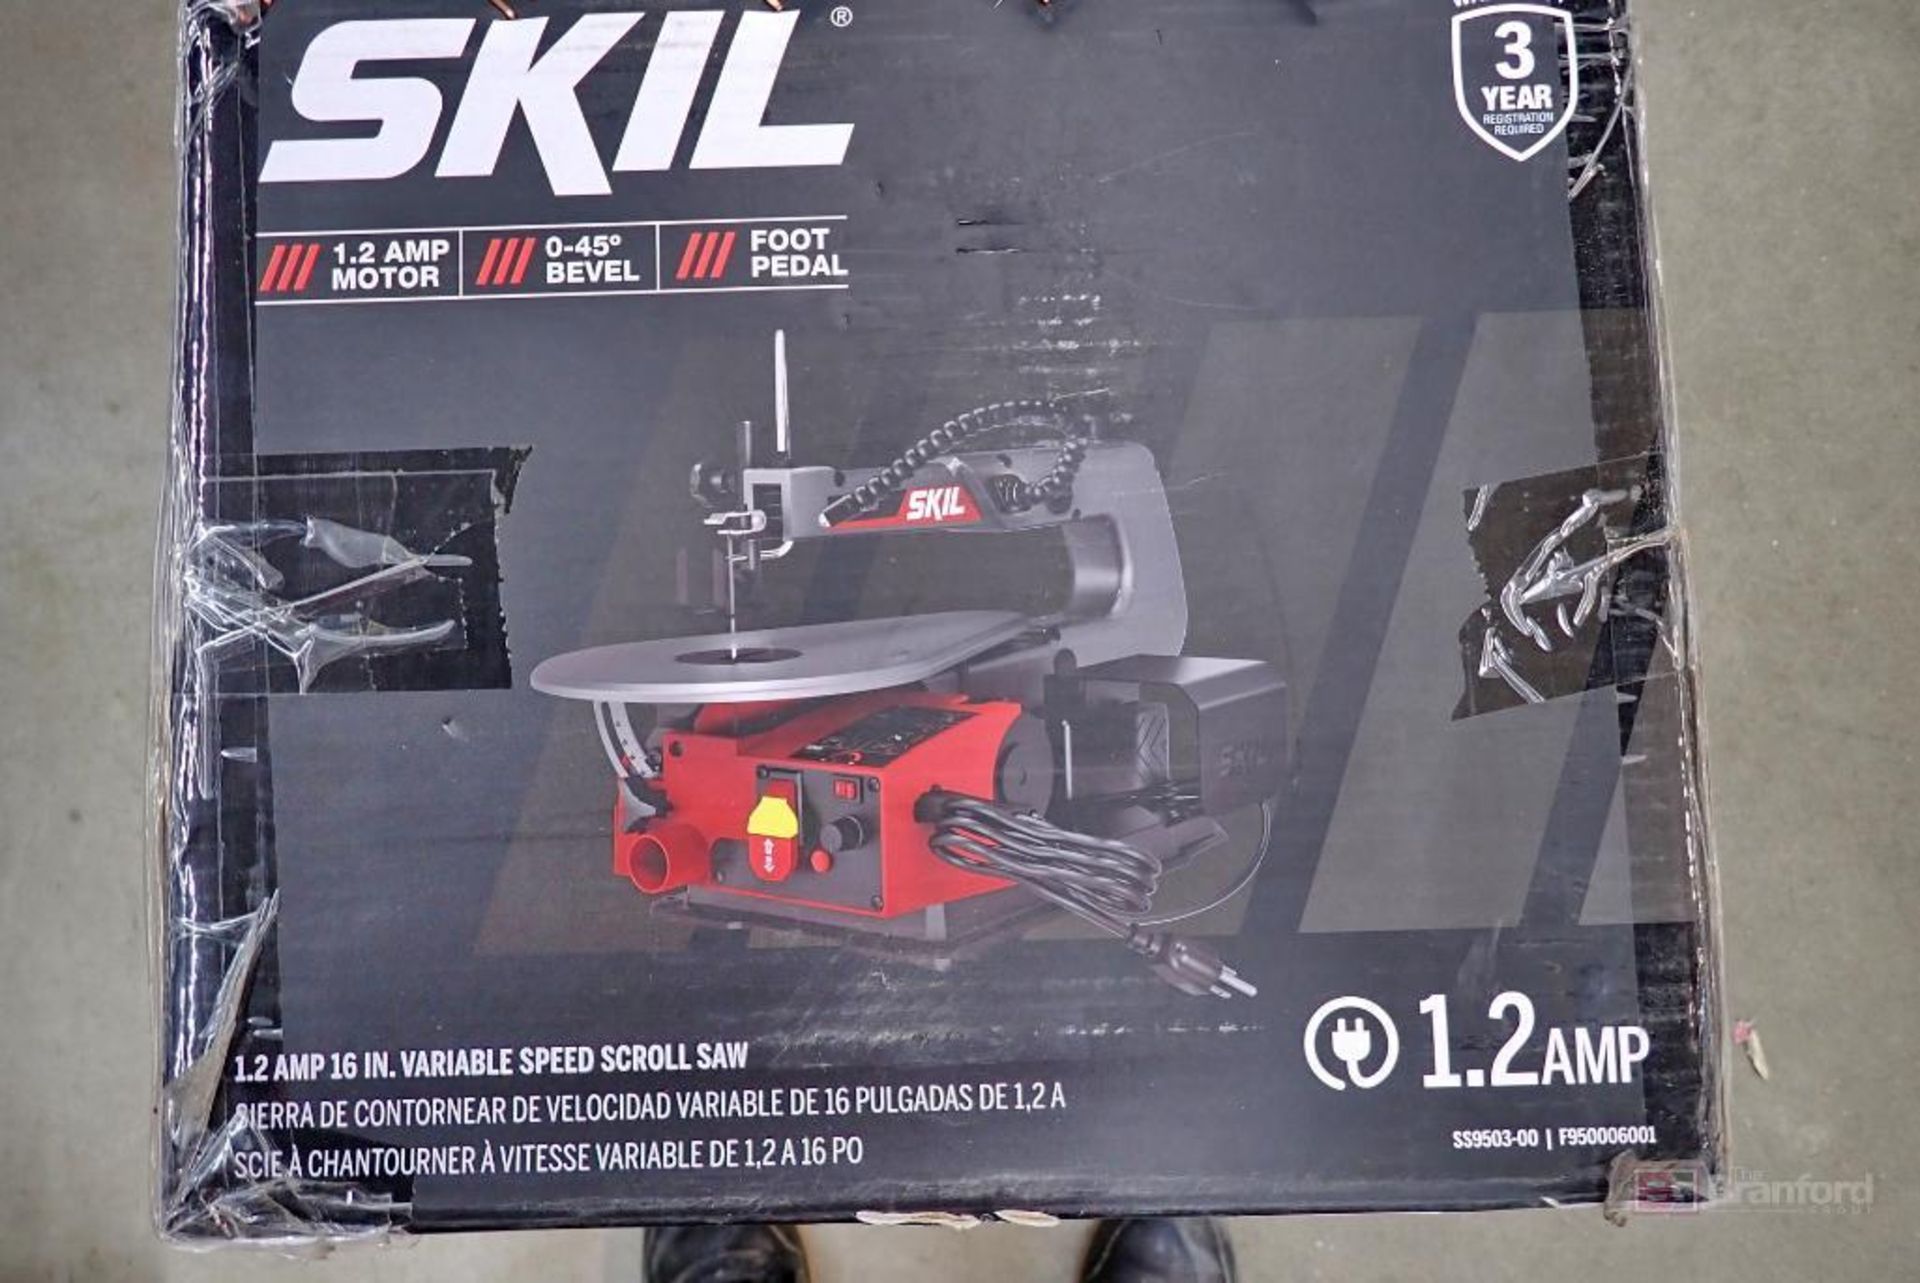 Skil SS9503-00 1.2-Amp 16" Variable Speed Scroll Saw - Image 2 of 3